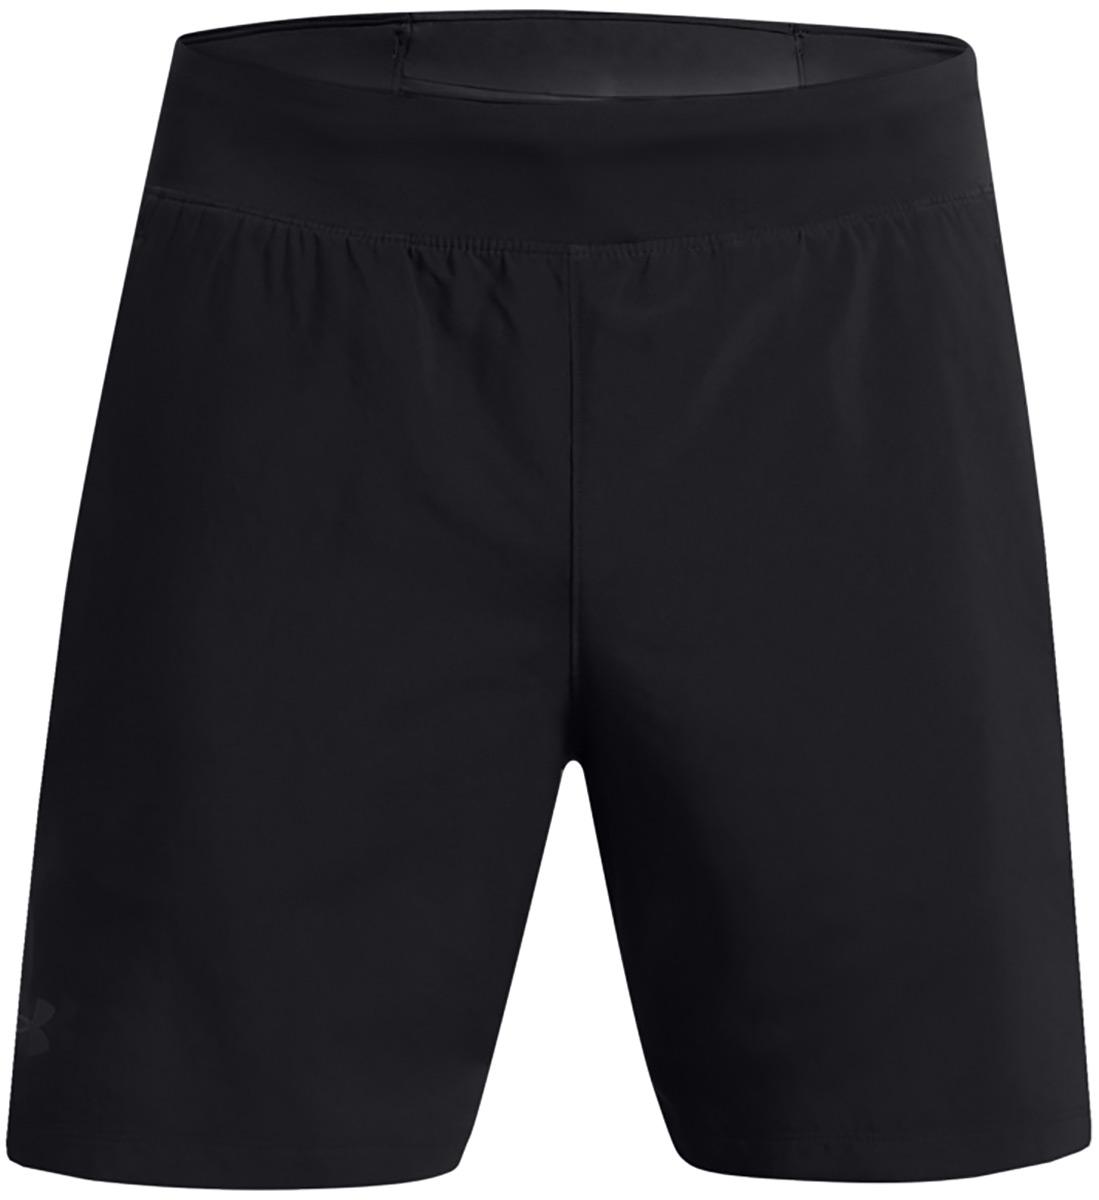 Under Armour Launch Elite 2in1 7 Shorts - Black / Black / Reflective